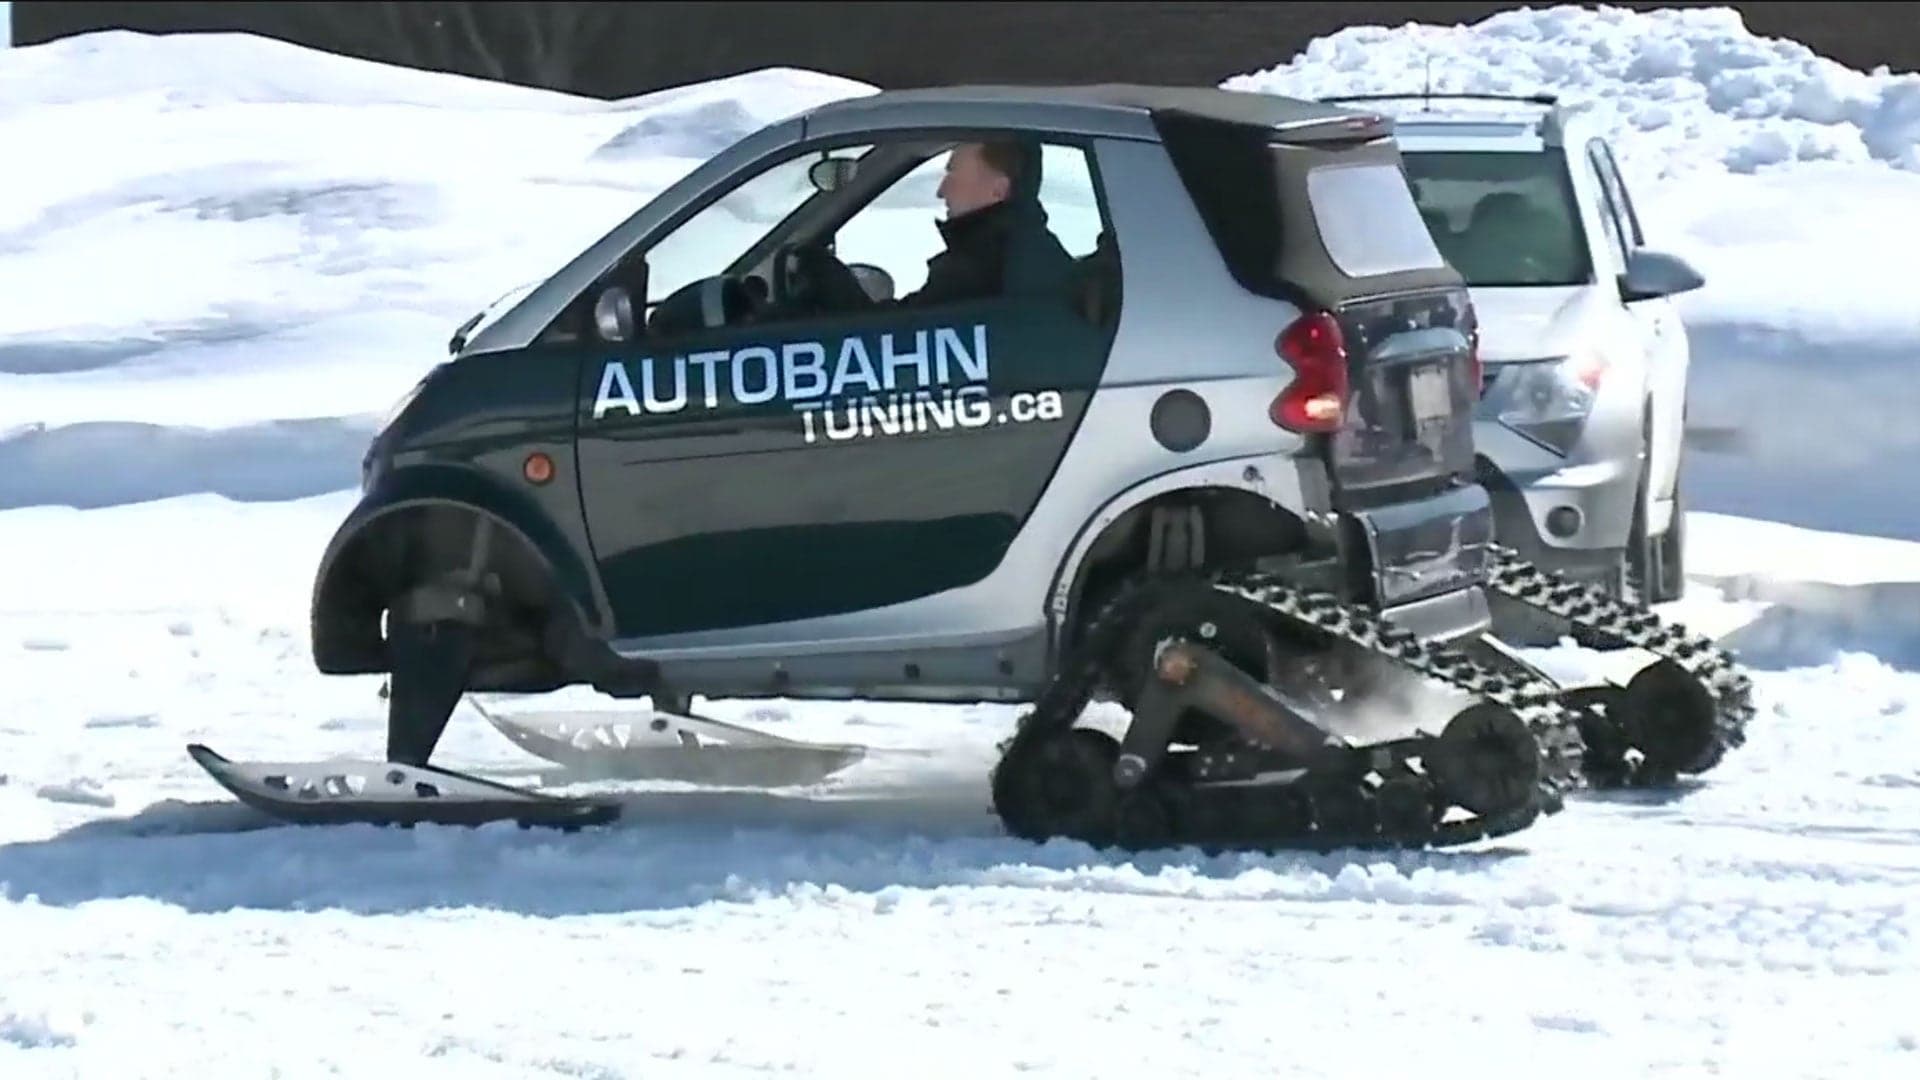 Canadian Man Turns Smart Car Into Snowmobile, Because Canada